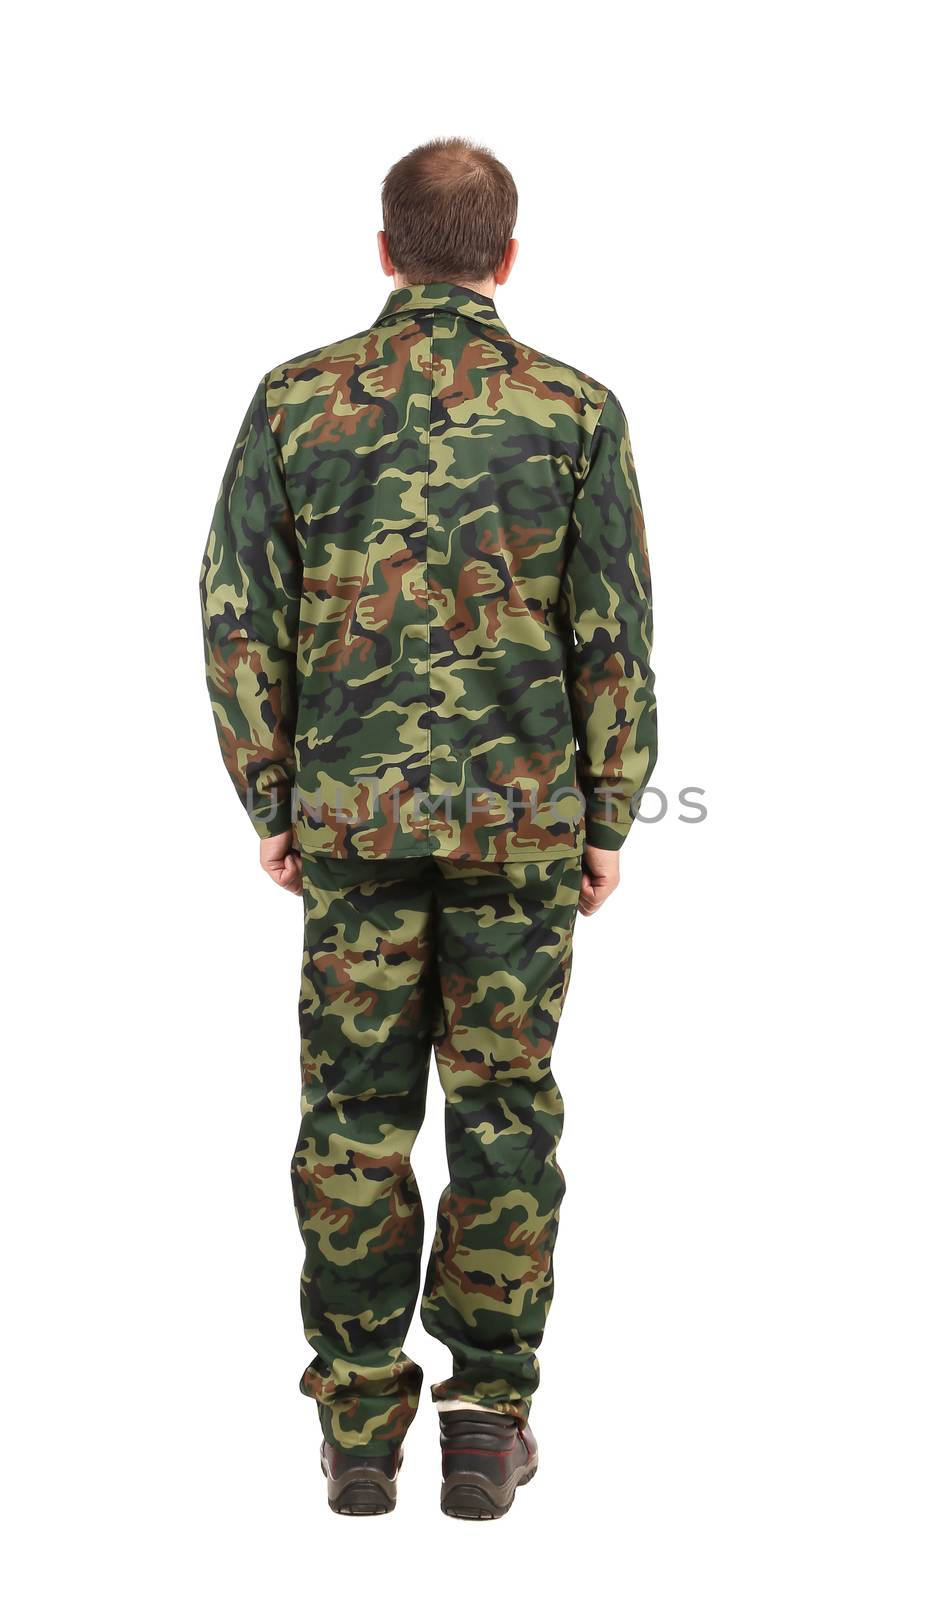 Back view of man in military suit. by indigolotos